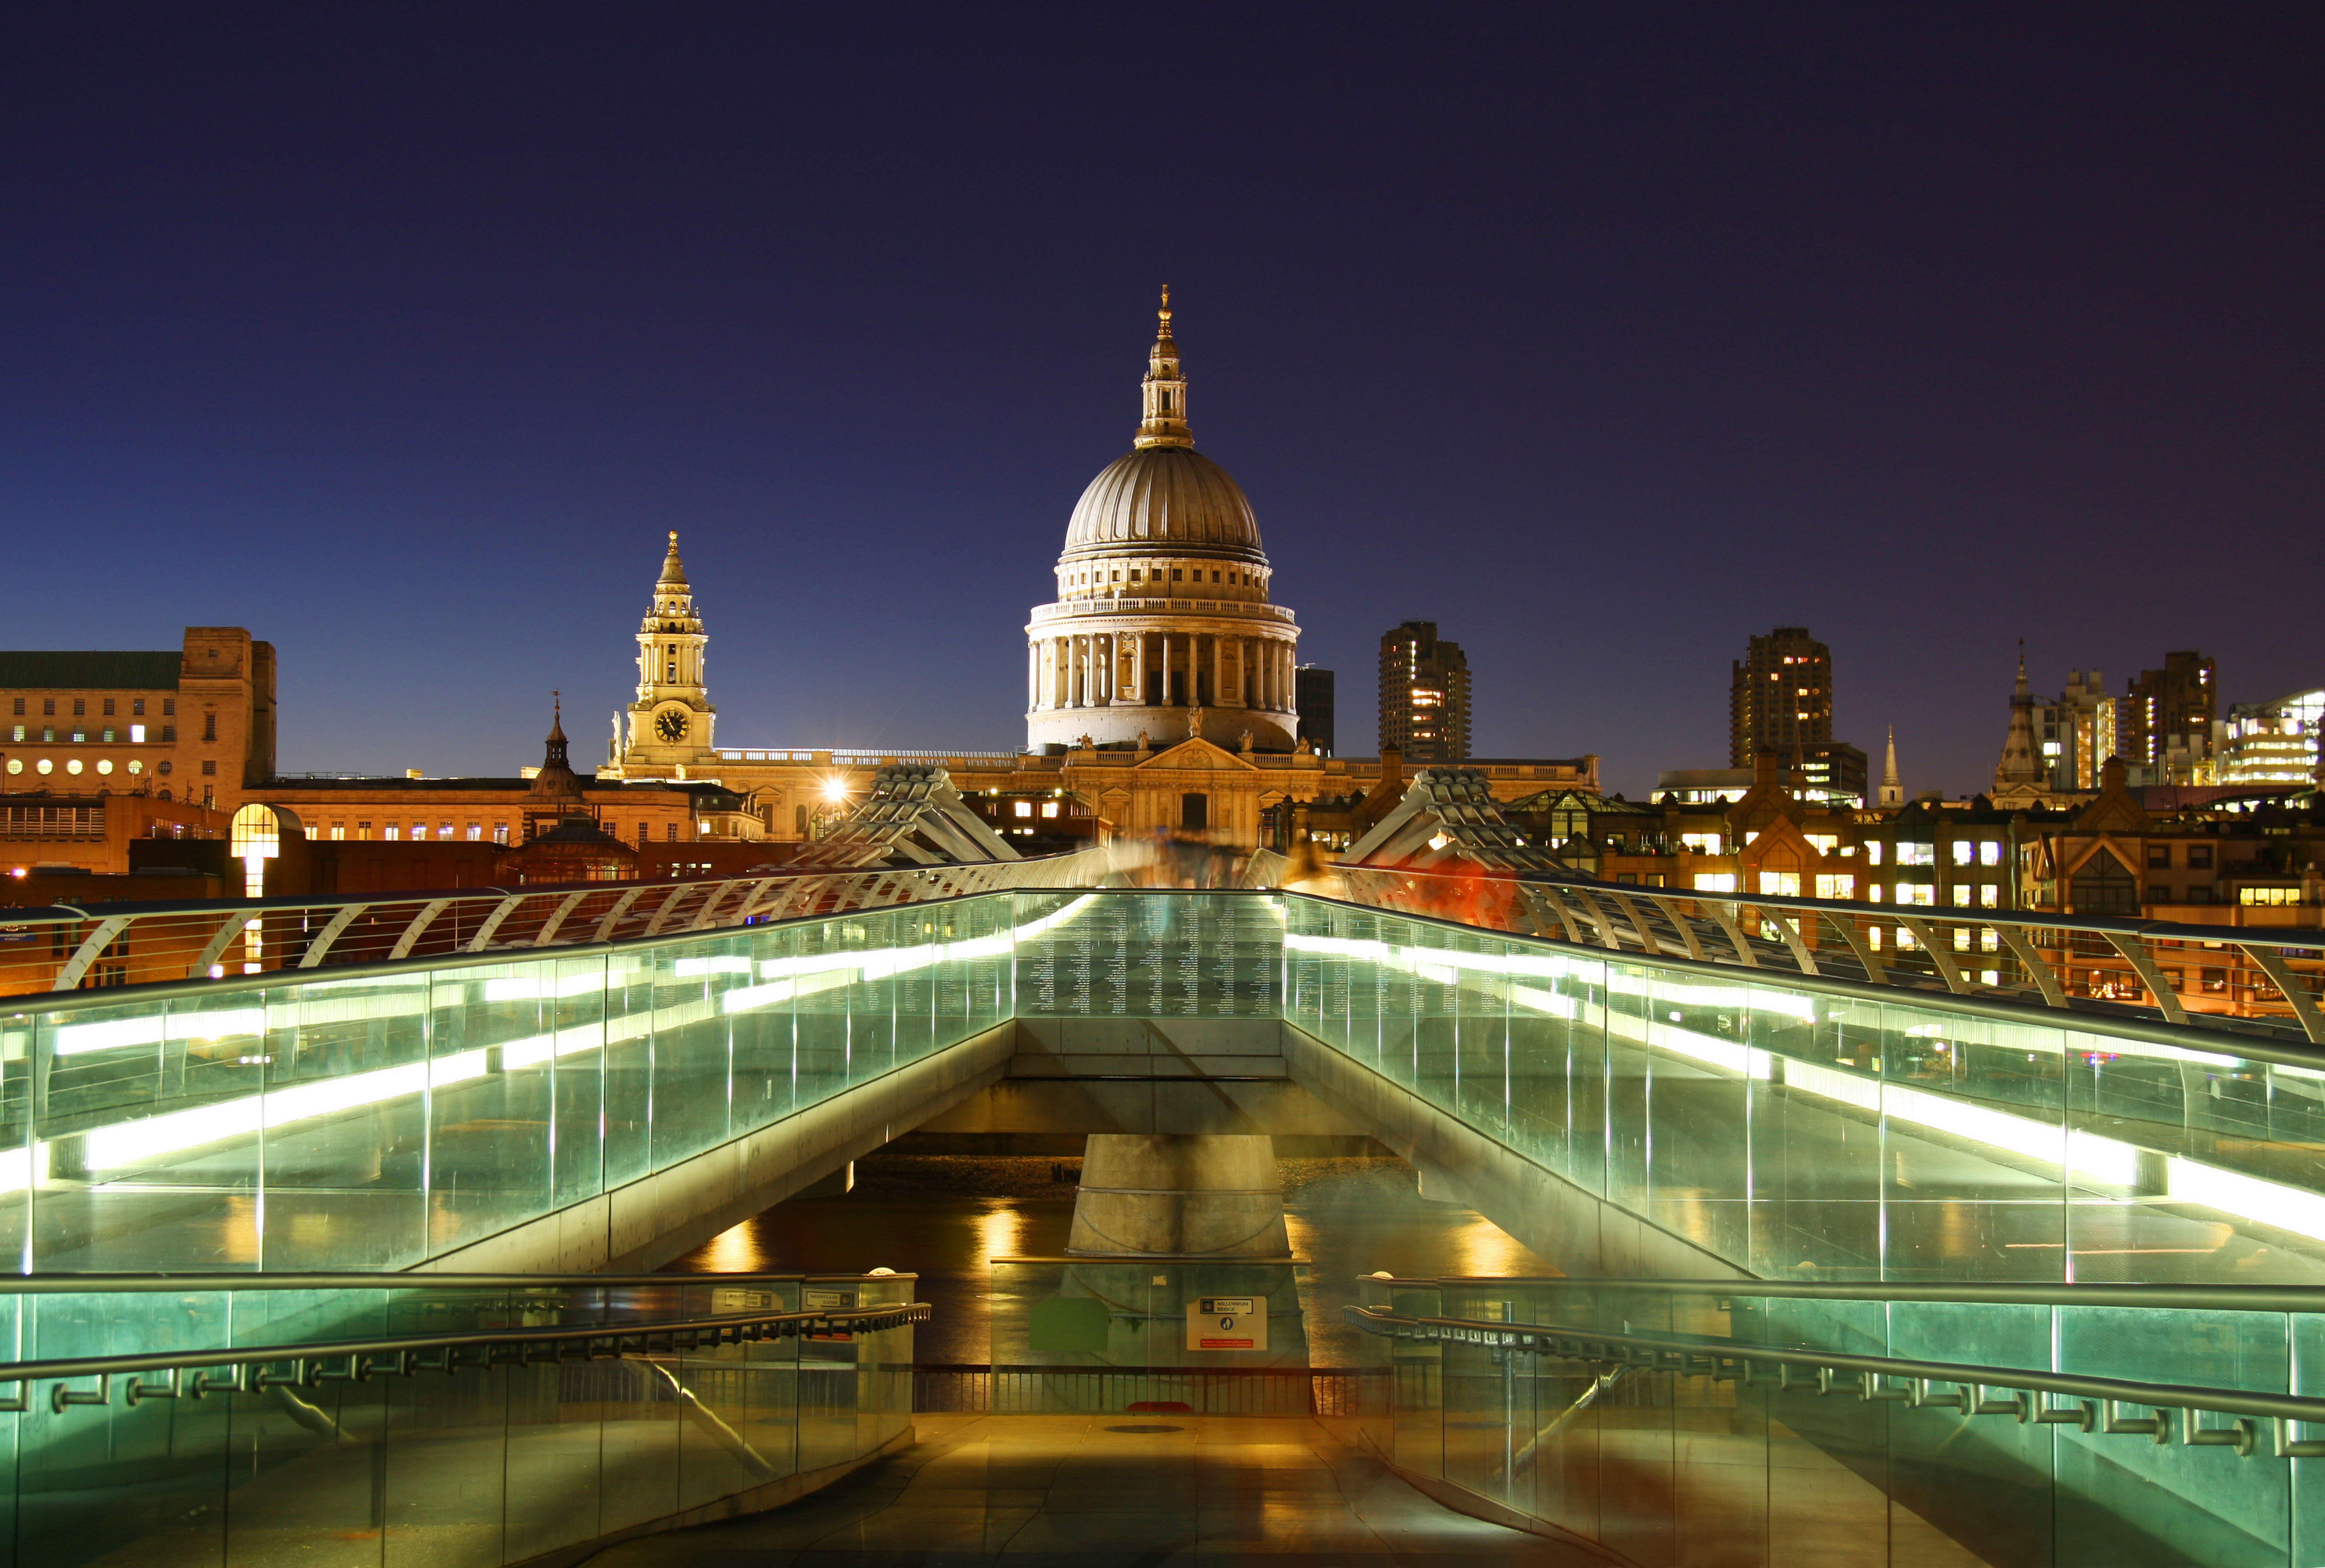 religious, st paul's cathedral, building, cathedral, light, london, millennium bridge, monument, night, united kingdom, cathedrals